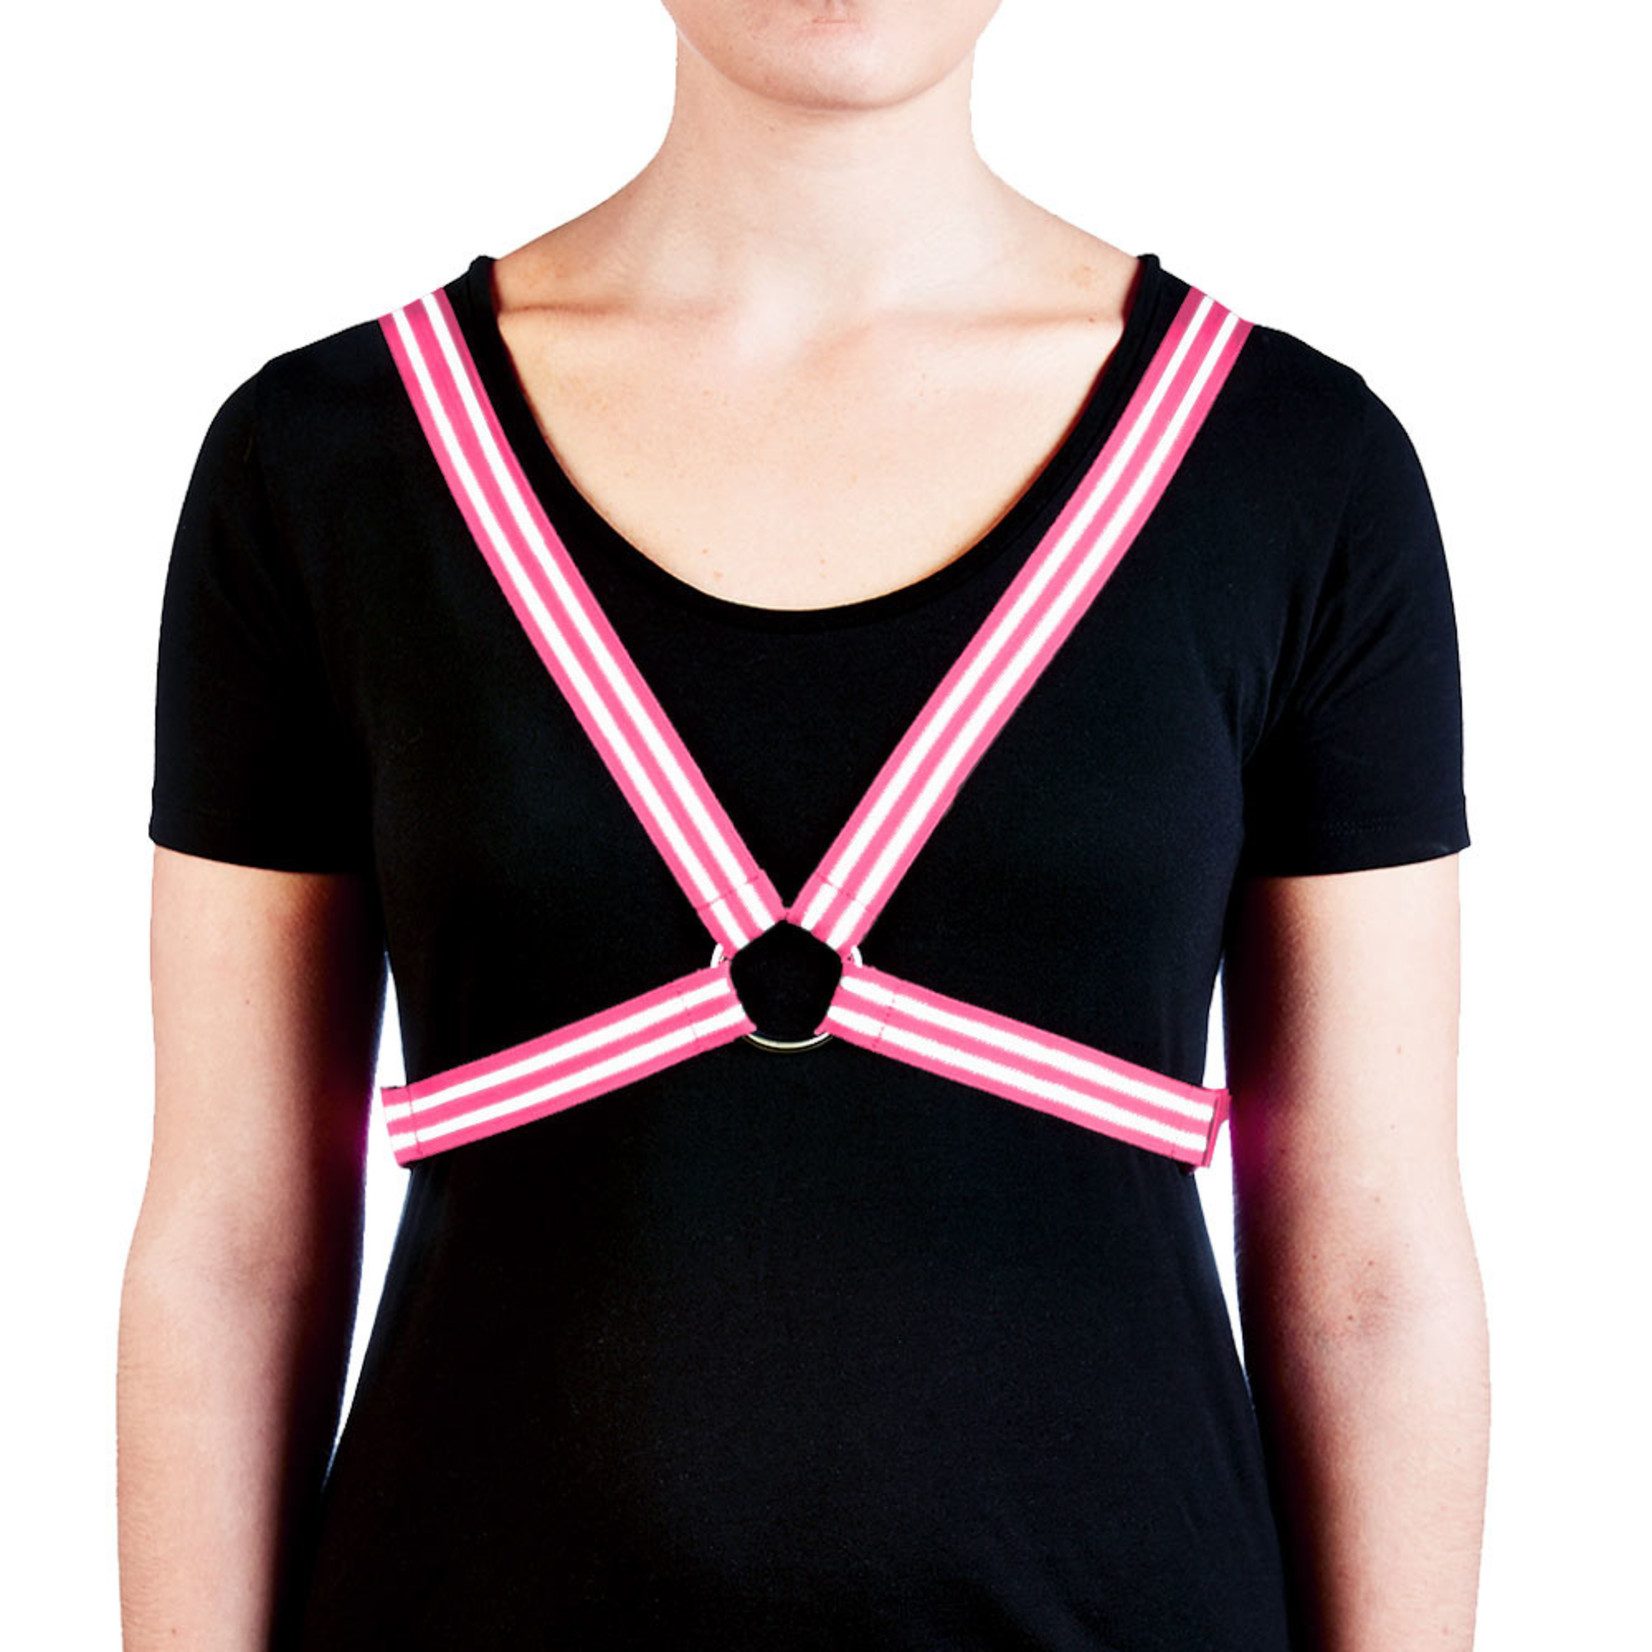 Monkey See MonkeySee Harness - Light Weight And Comfortable - Fluro Pink